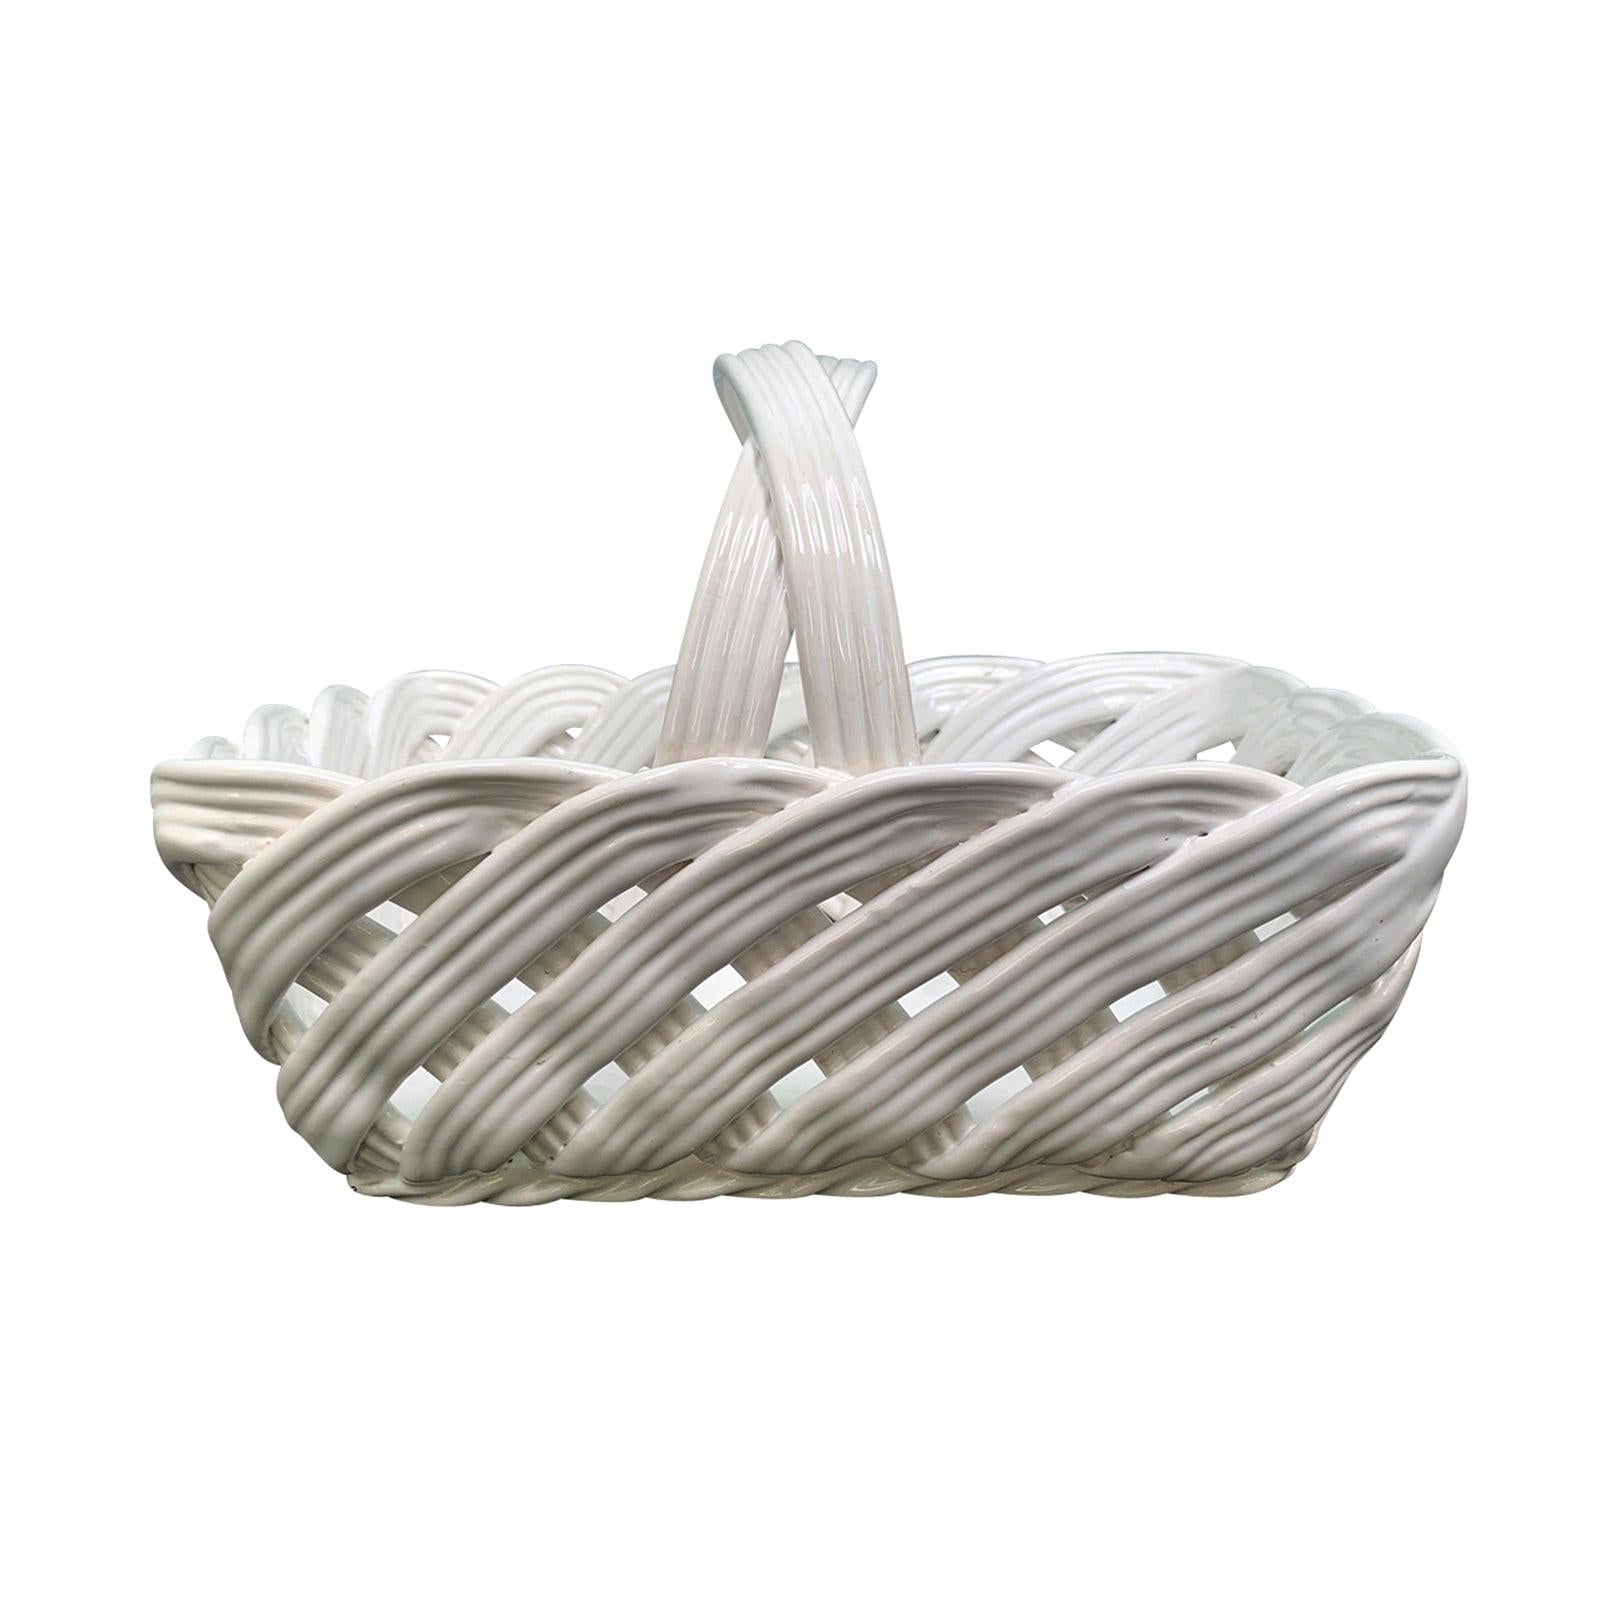 20th Century Portuguese White Porcelain Basket, Marked "Made in Portugal" For Sale